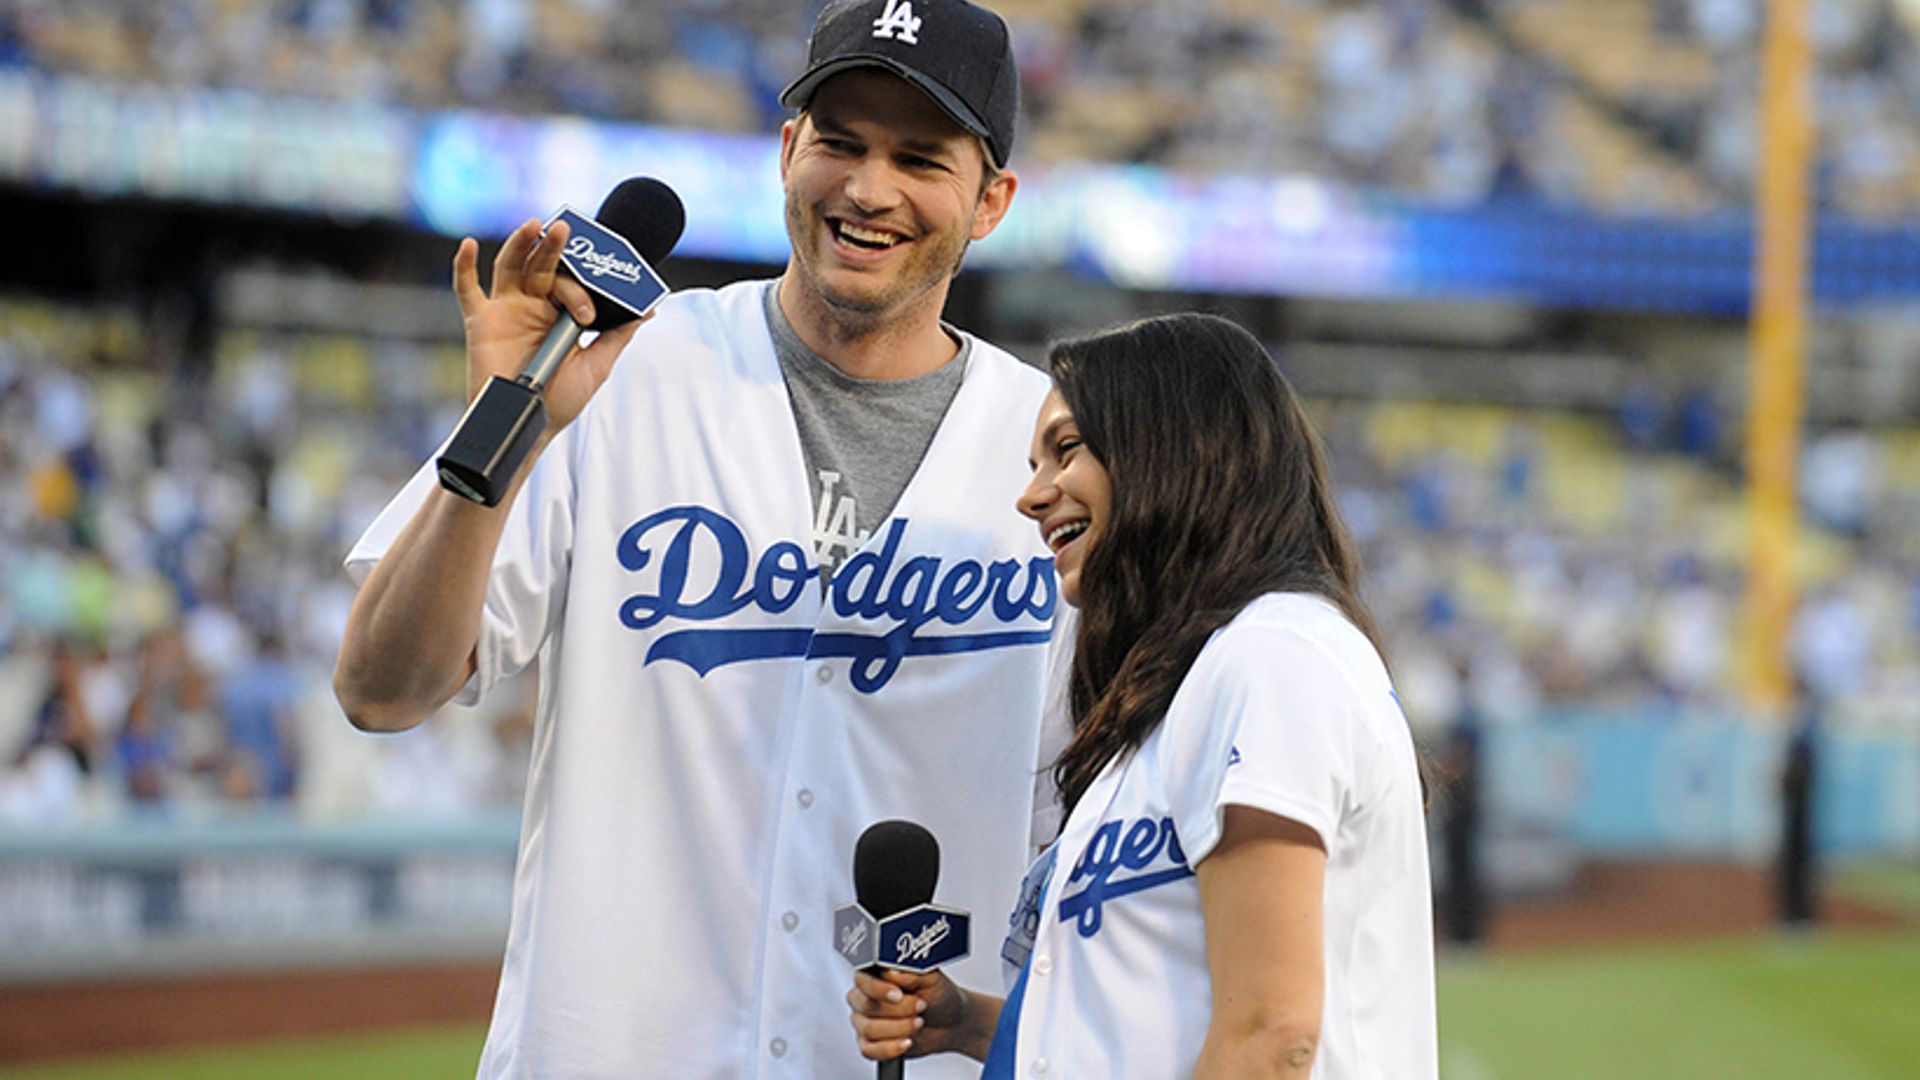 Mila Kunis shows off beautiful baby bump on sporty date with Ashton Kutcher